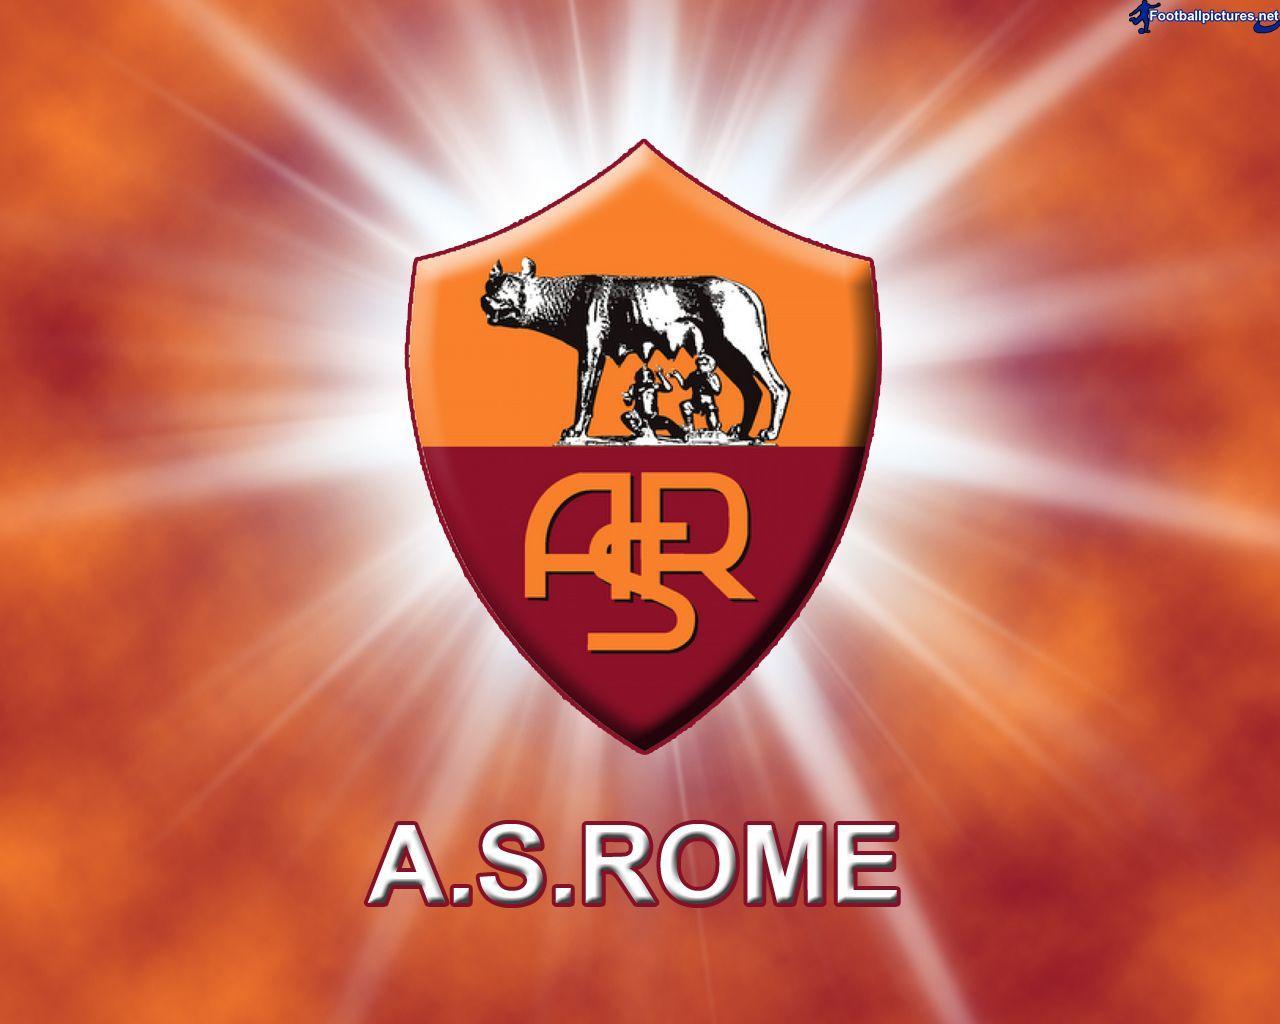 As Roma picture, Football Wallpaper and Photo